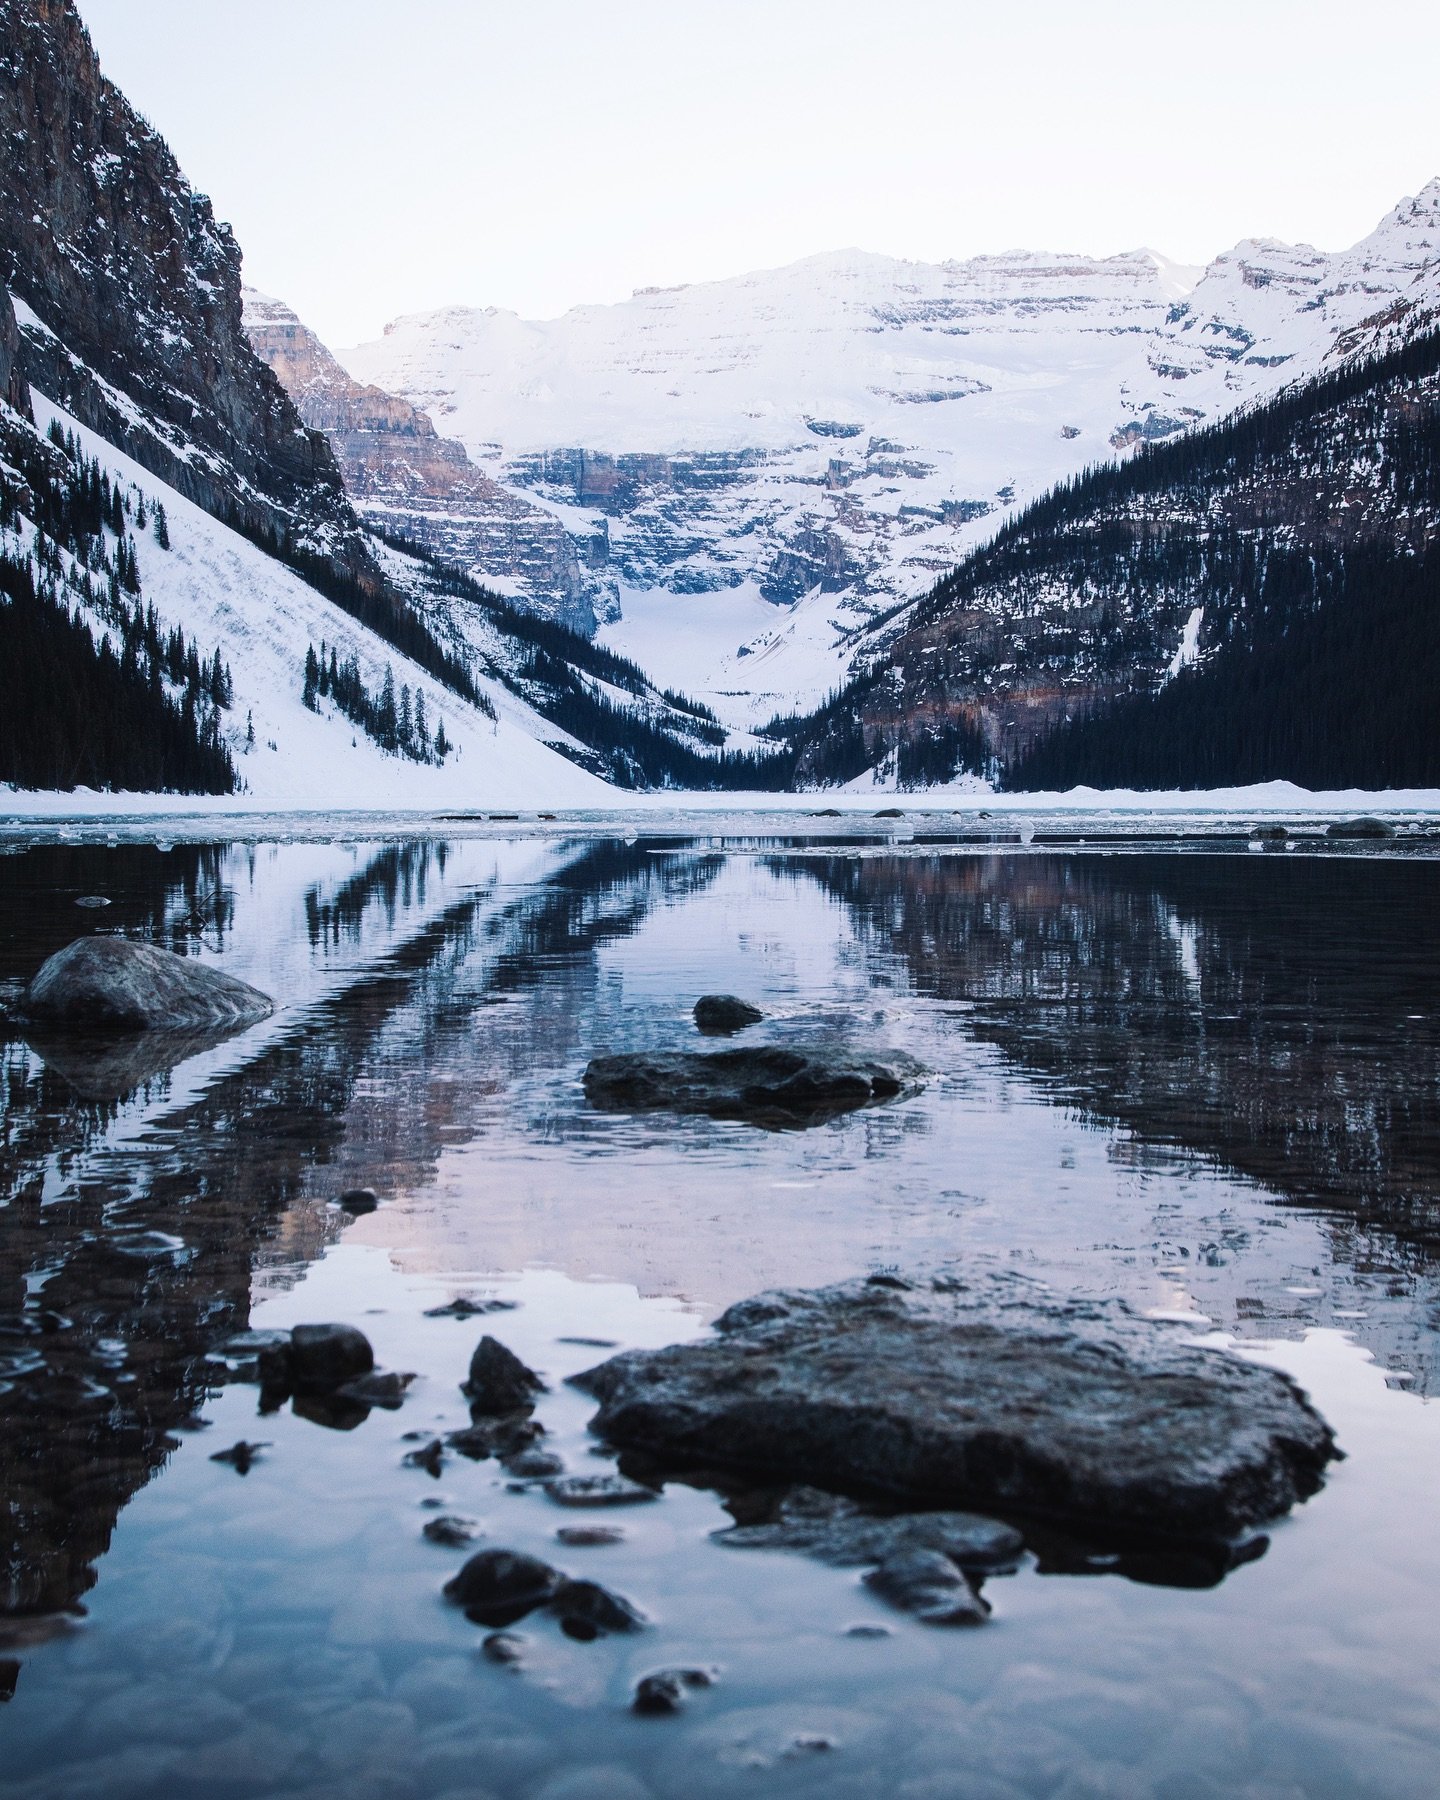 I finally got to check off a bucket-list item and visit Lake Louise. It can be challenging as a photographer to try and uniquely capture the beauty of something that you&rsquo;ve seen shot hundreds of times. The snowy landscape was stunning and I did